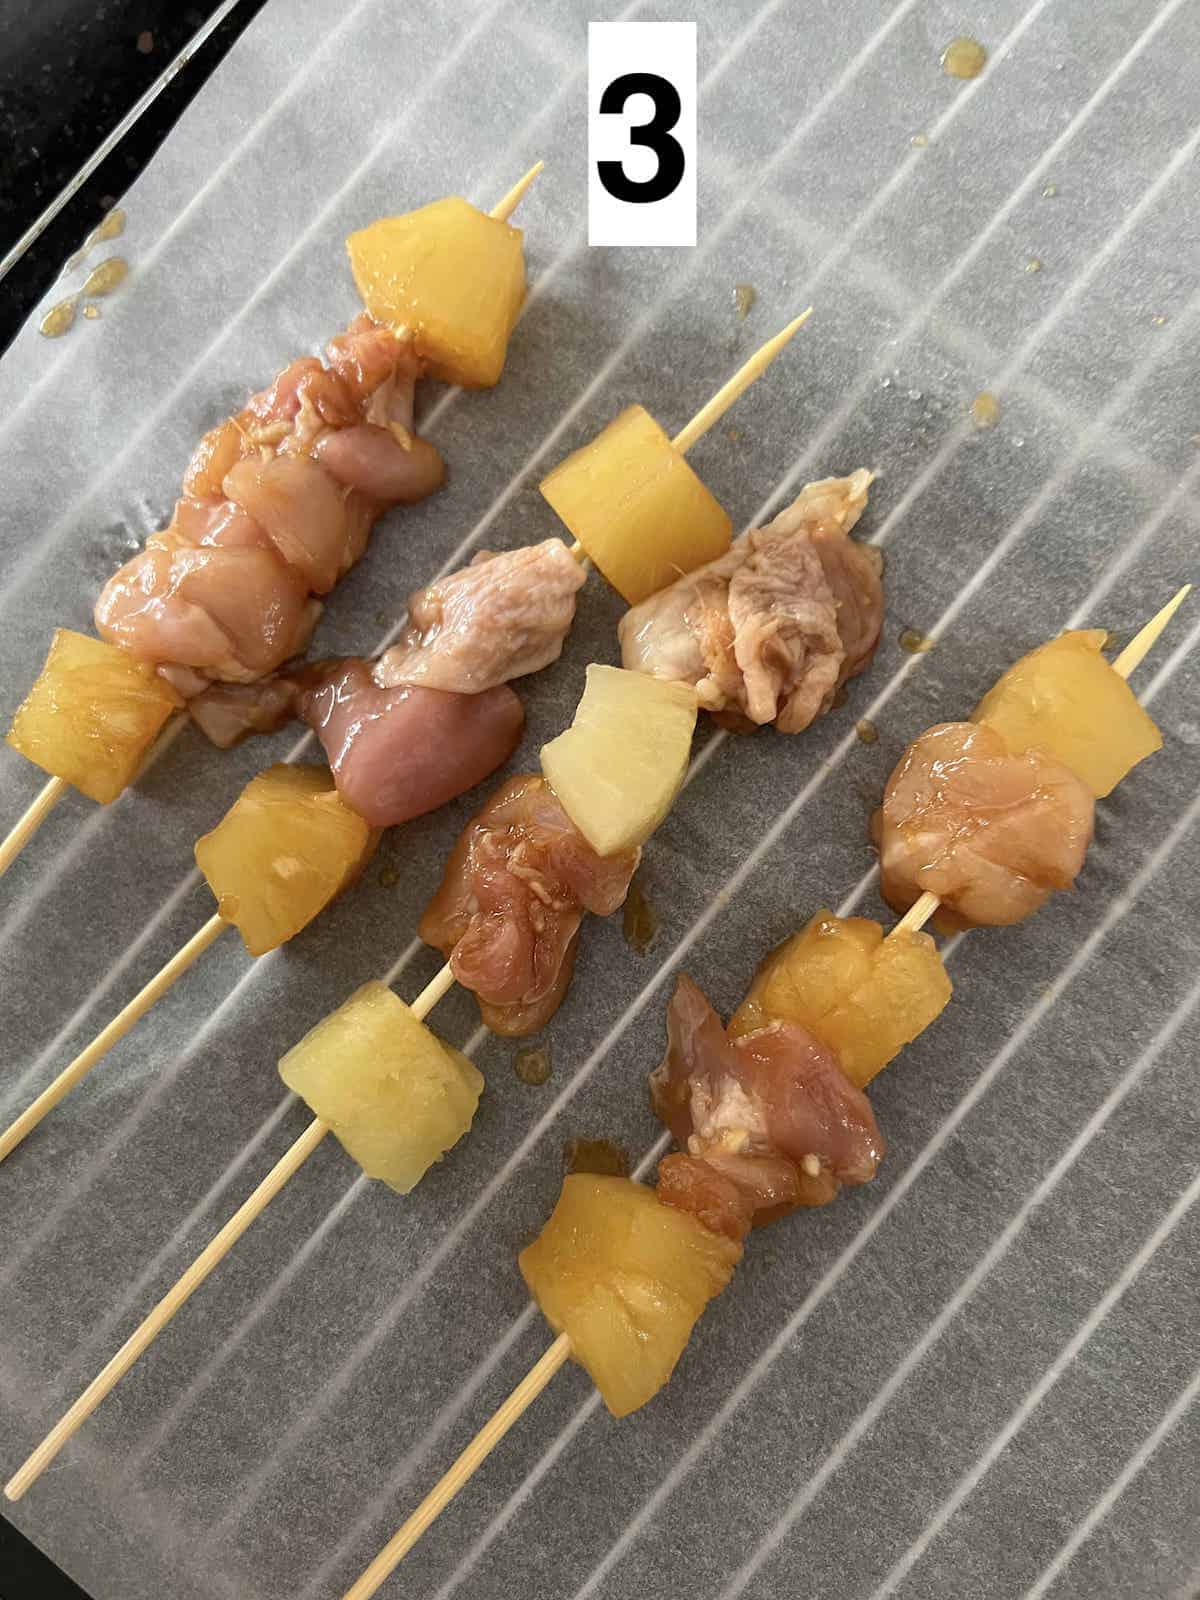 Skewered chicken and pineapple on wooden sticks.